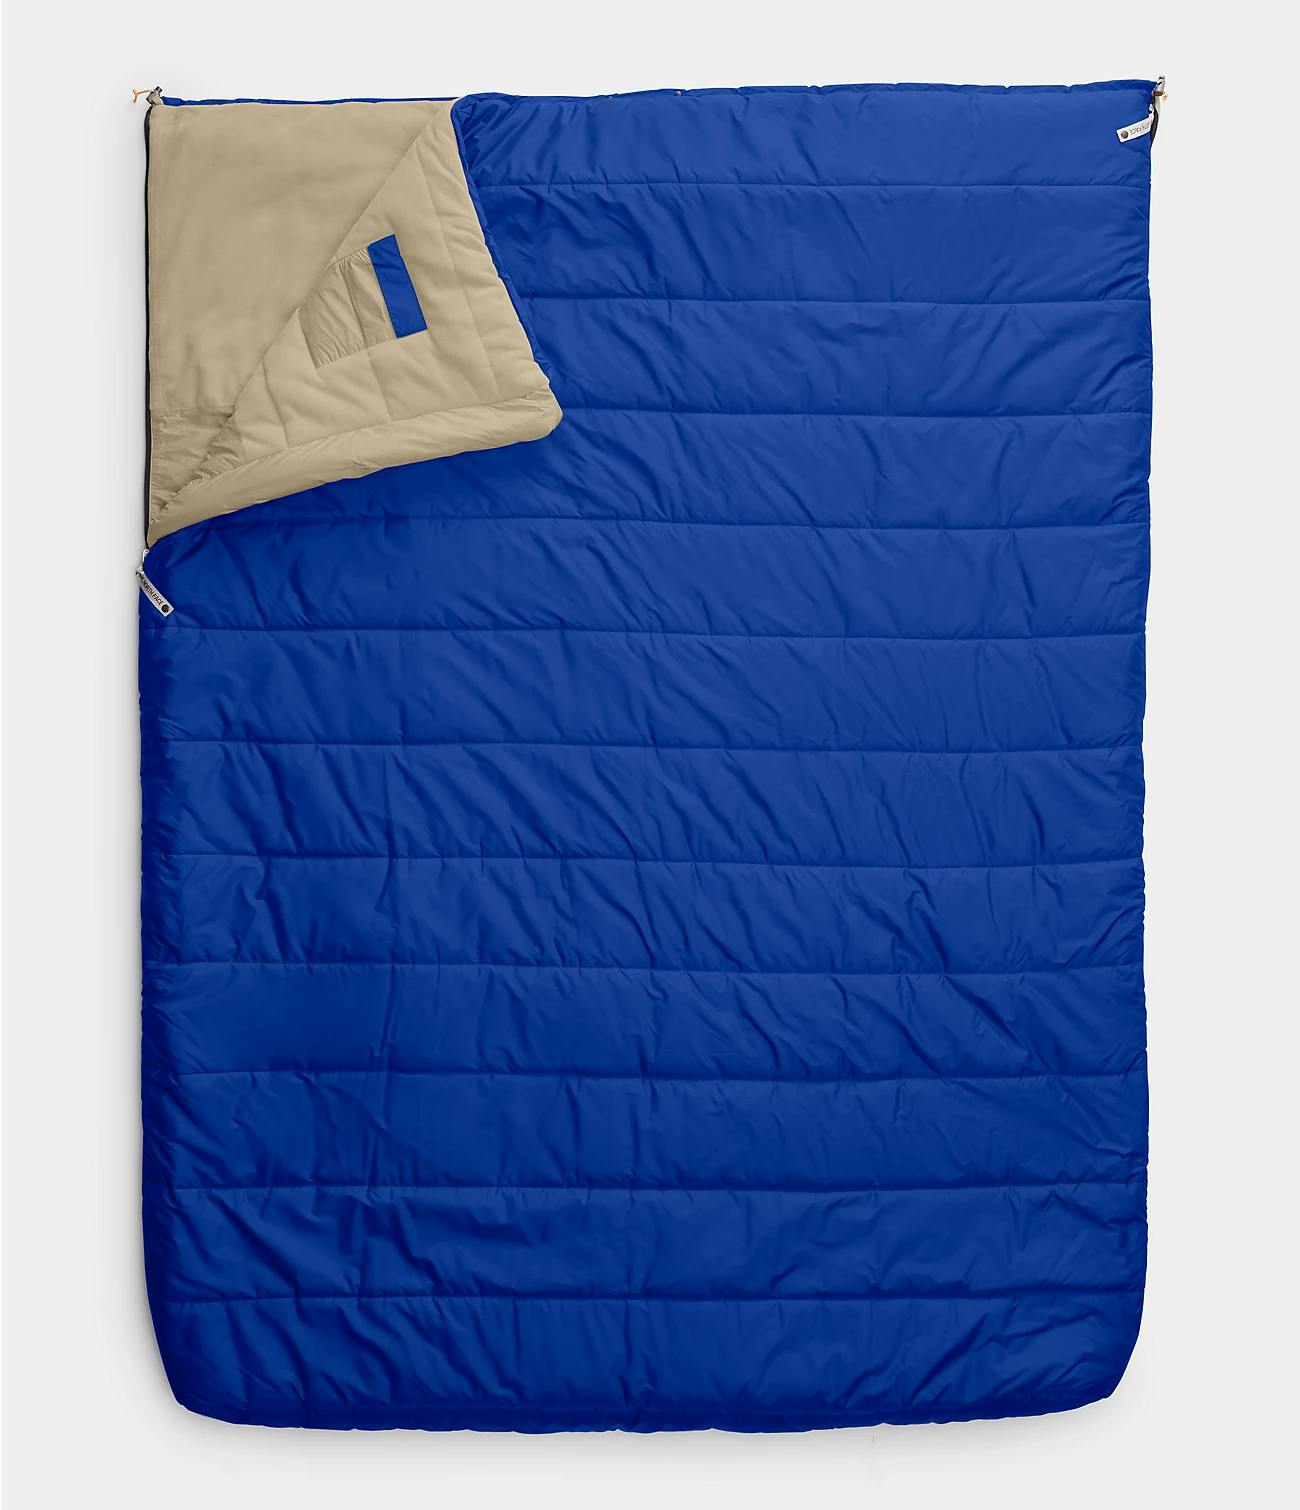 The North Face Eco Trail Bed Double 20 Sleeping Bag - Men's